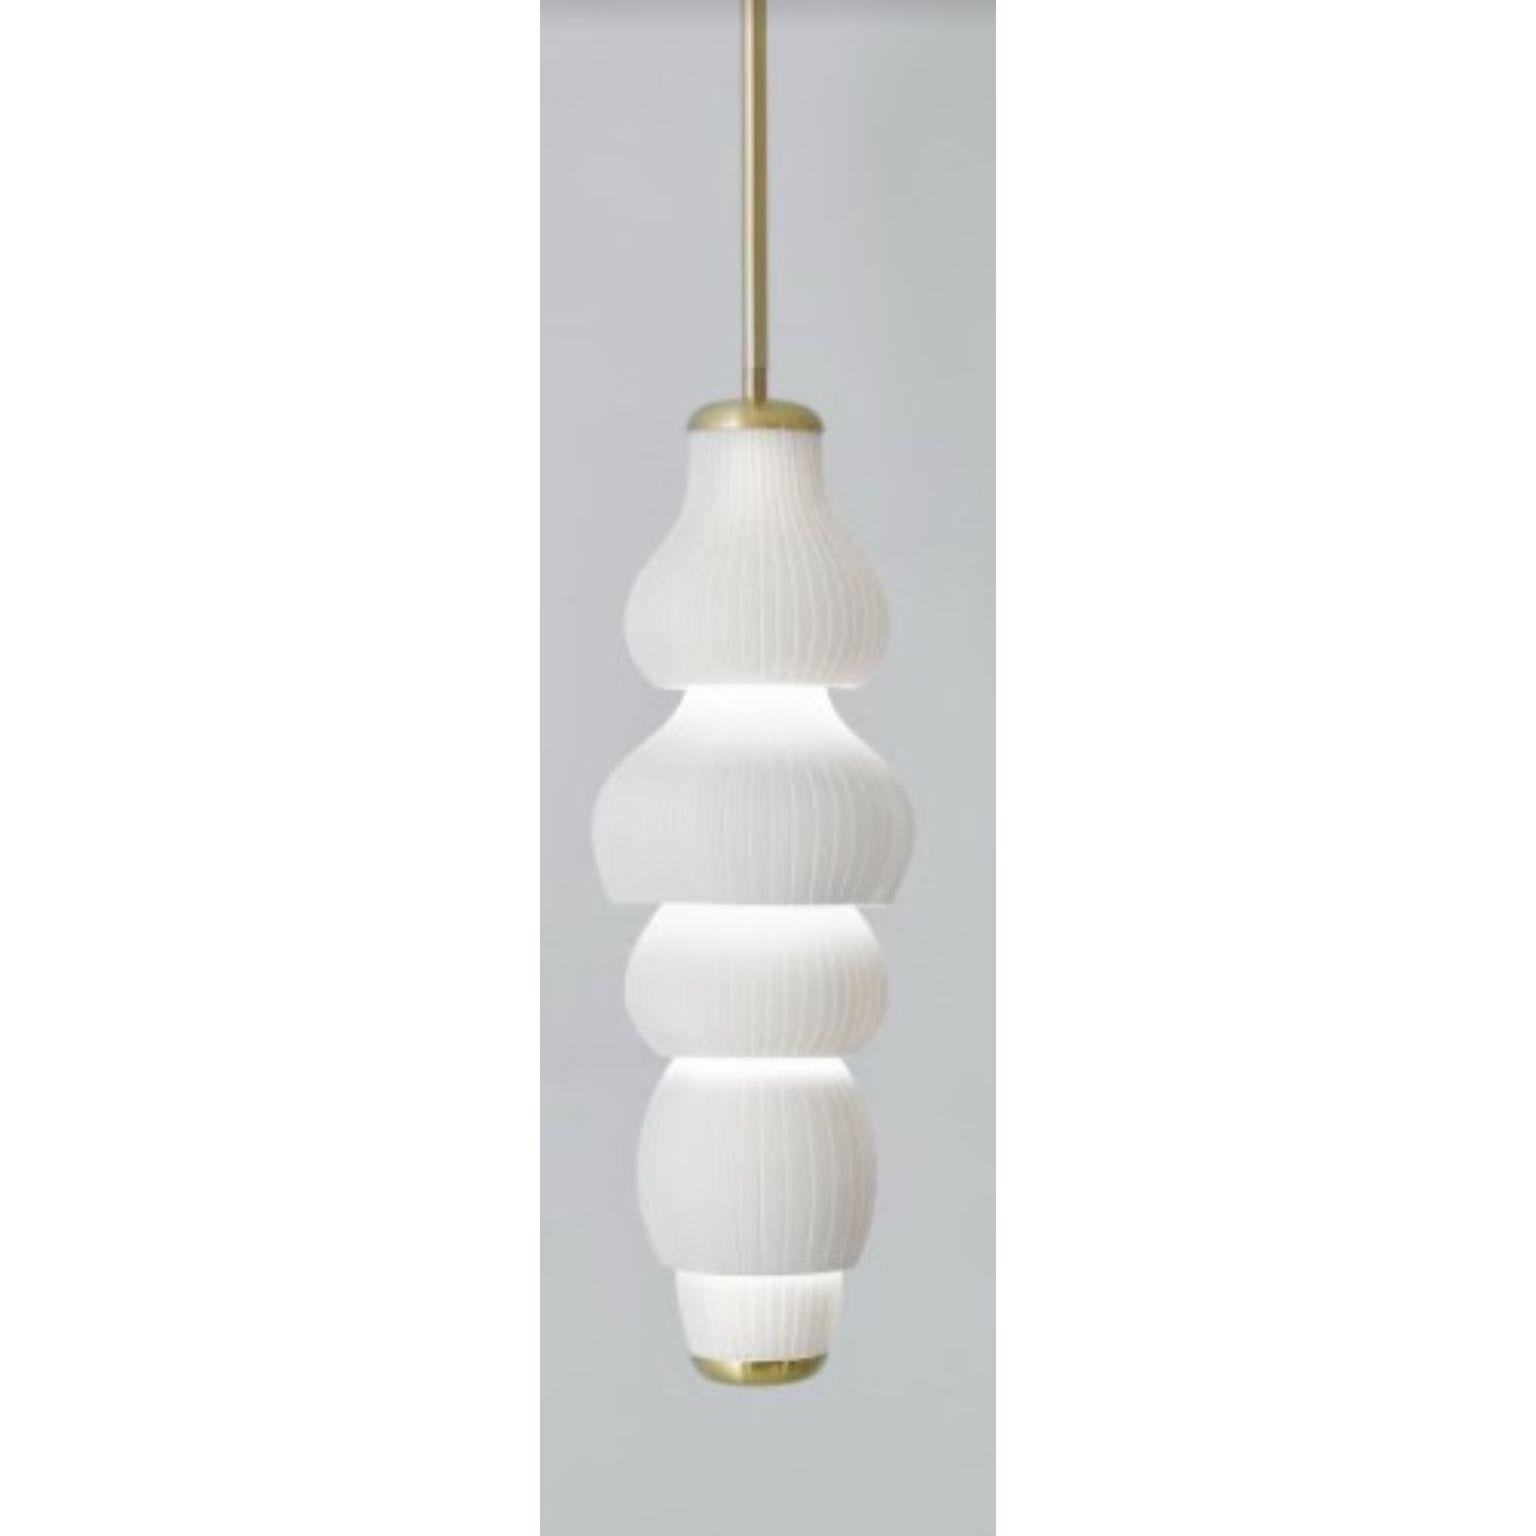 Glaïeul large pendant light by Mydriaz.
Dimensions: D 26 x H 100 cm. 
Materials: Brushed brass, pale gold finish, biscuit ceramic.
Adjustable measure.

All our lamps can be wired according to each country. If sold to the USA it will be wired